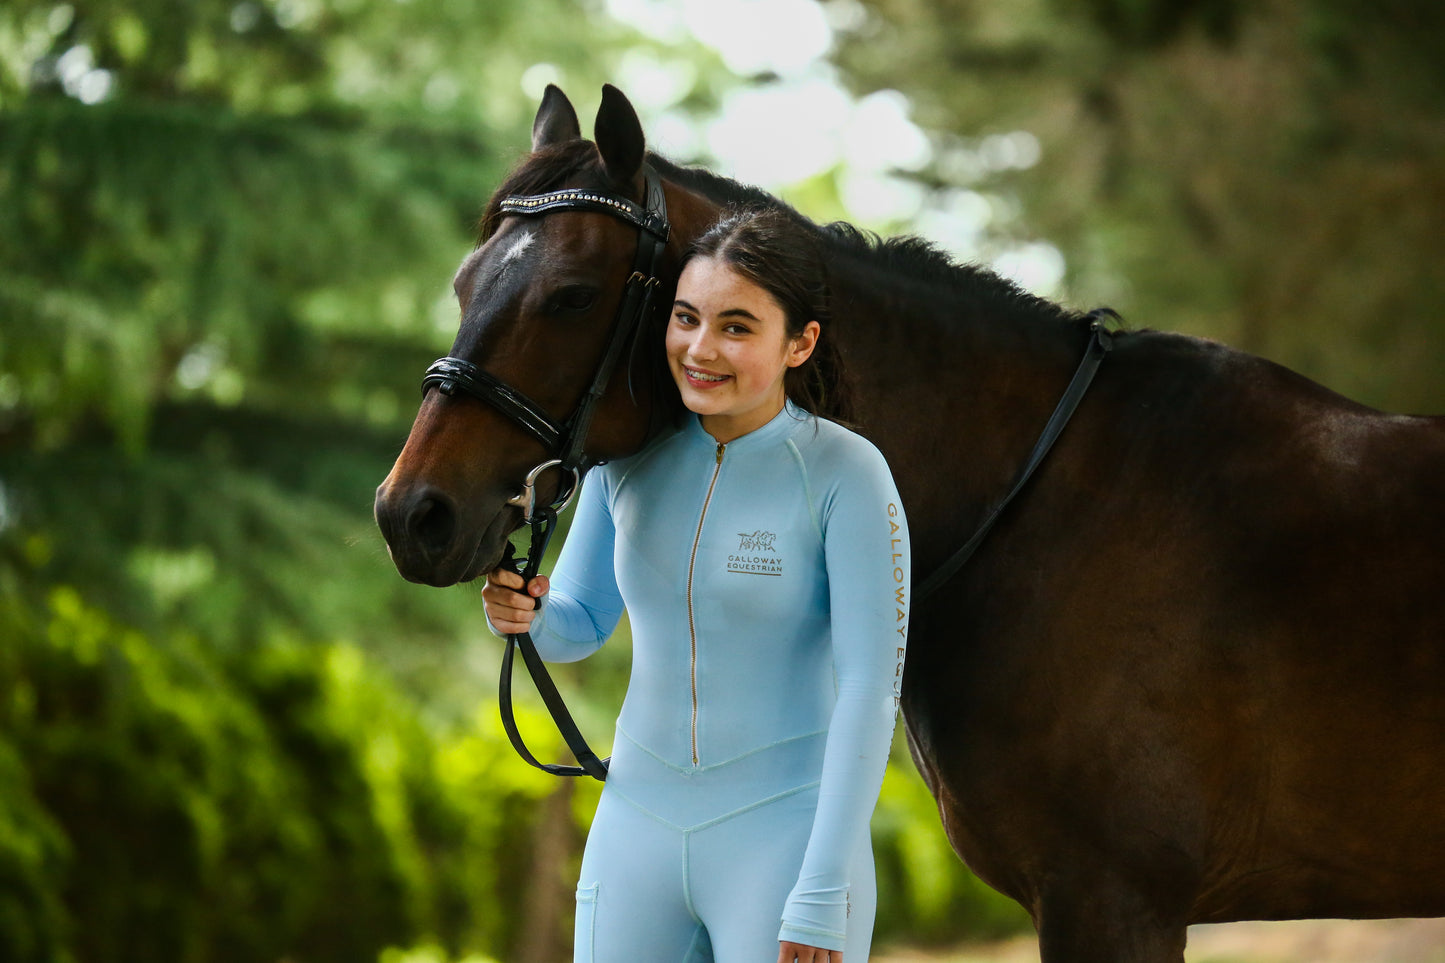 BUBBLE GUM - light weight summer long sleeve Galloway Equestrian Performance Riding Suit